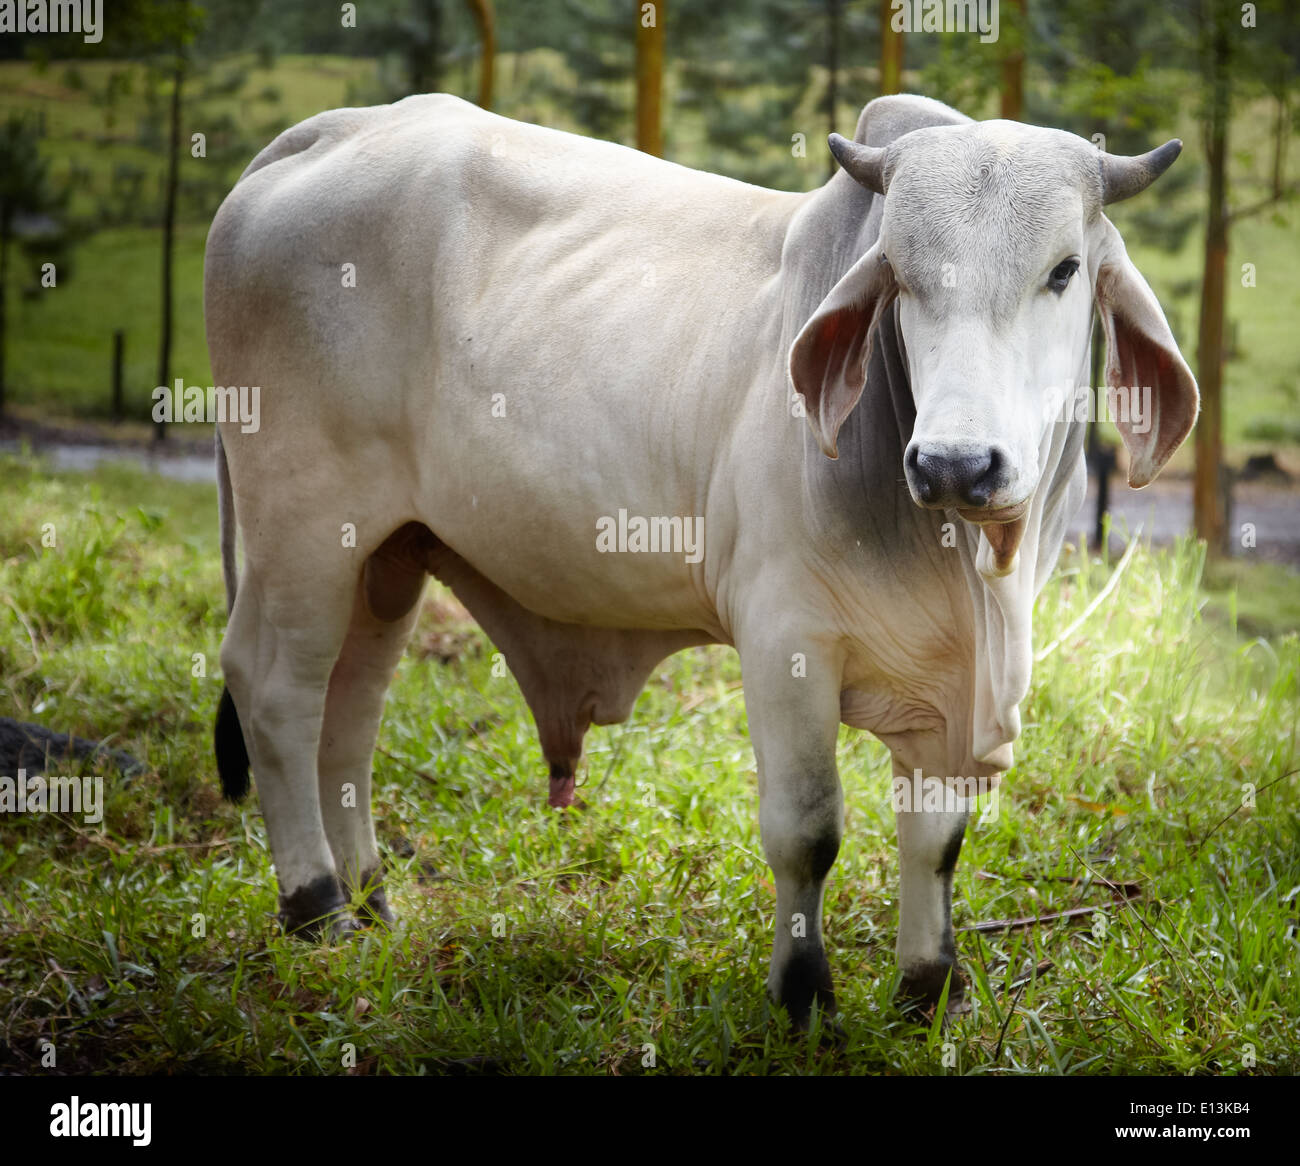 Close-up of an Ox, Costa Rica Stock Photo